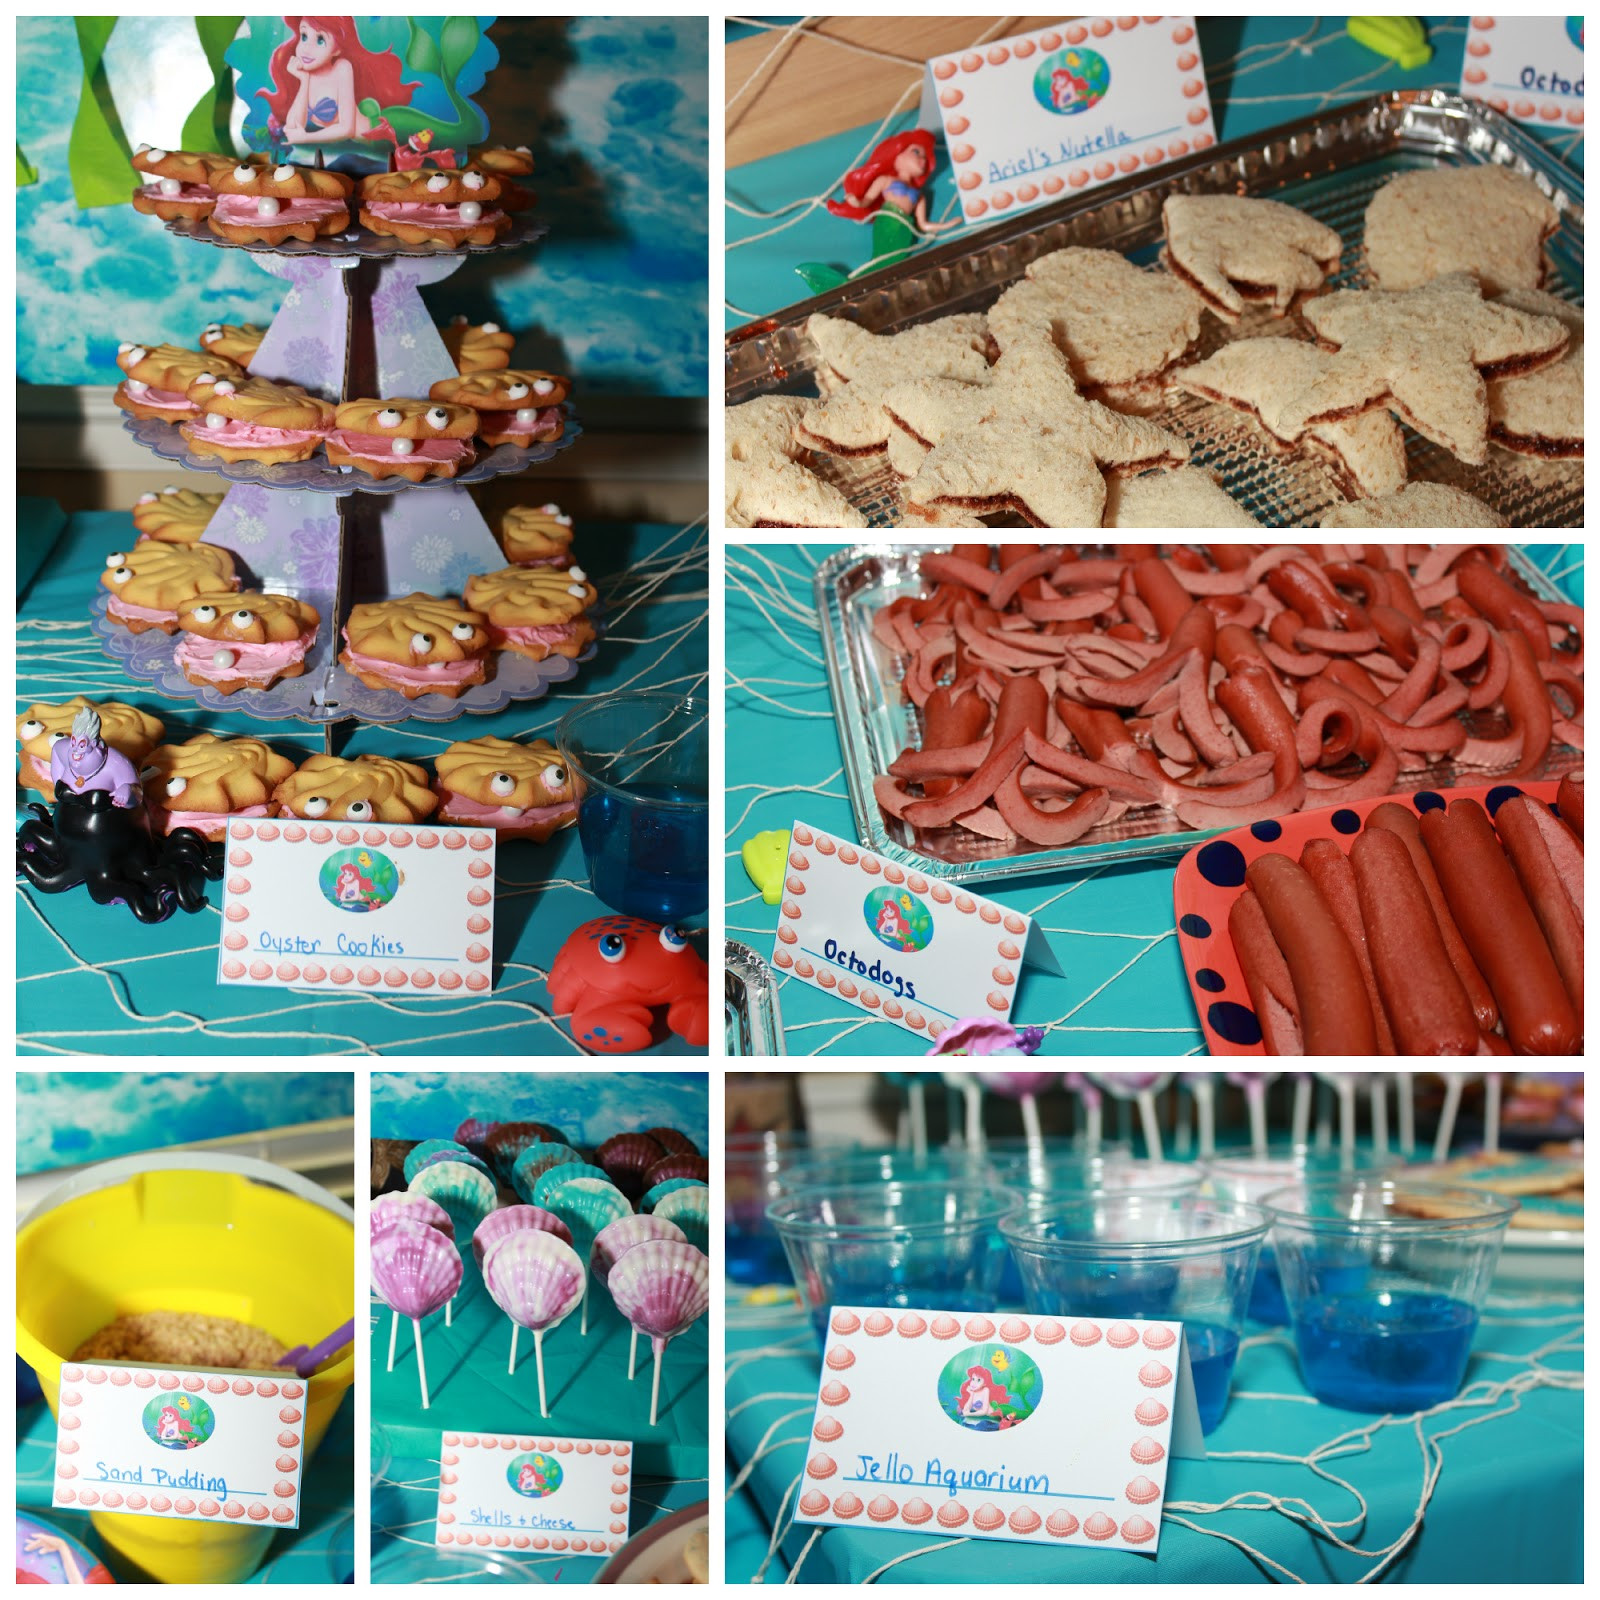 Little Mermaid Birthday Party Decorations
 Melissa s Party Ideas The Little Mermaid Party Ideas